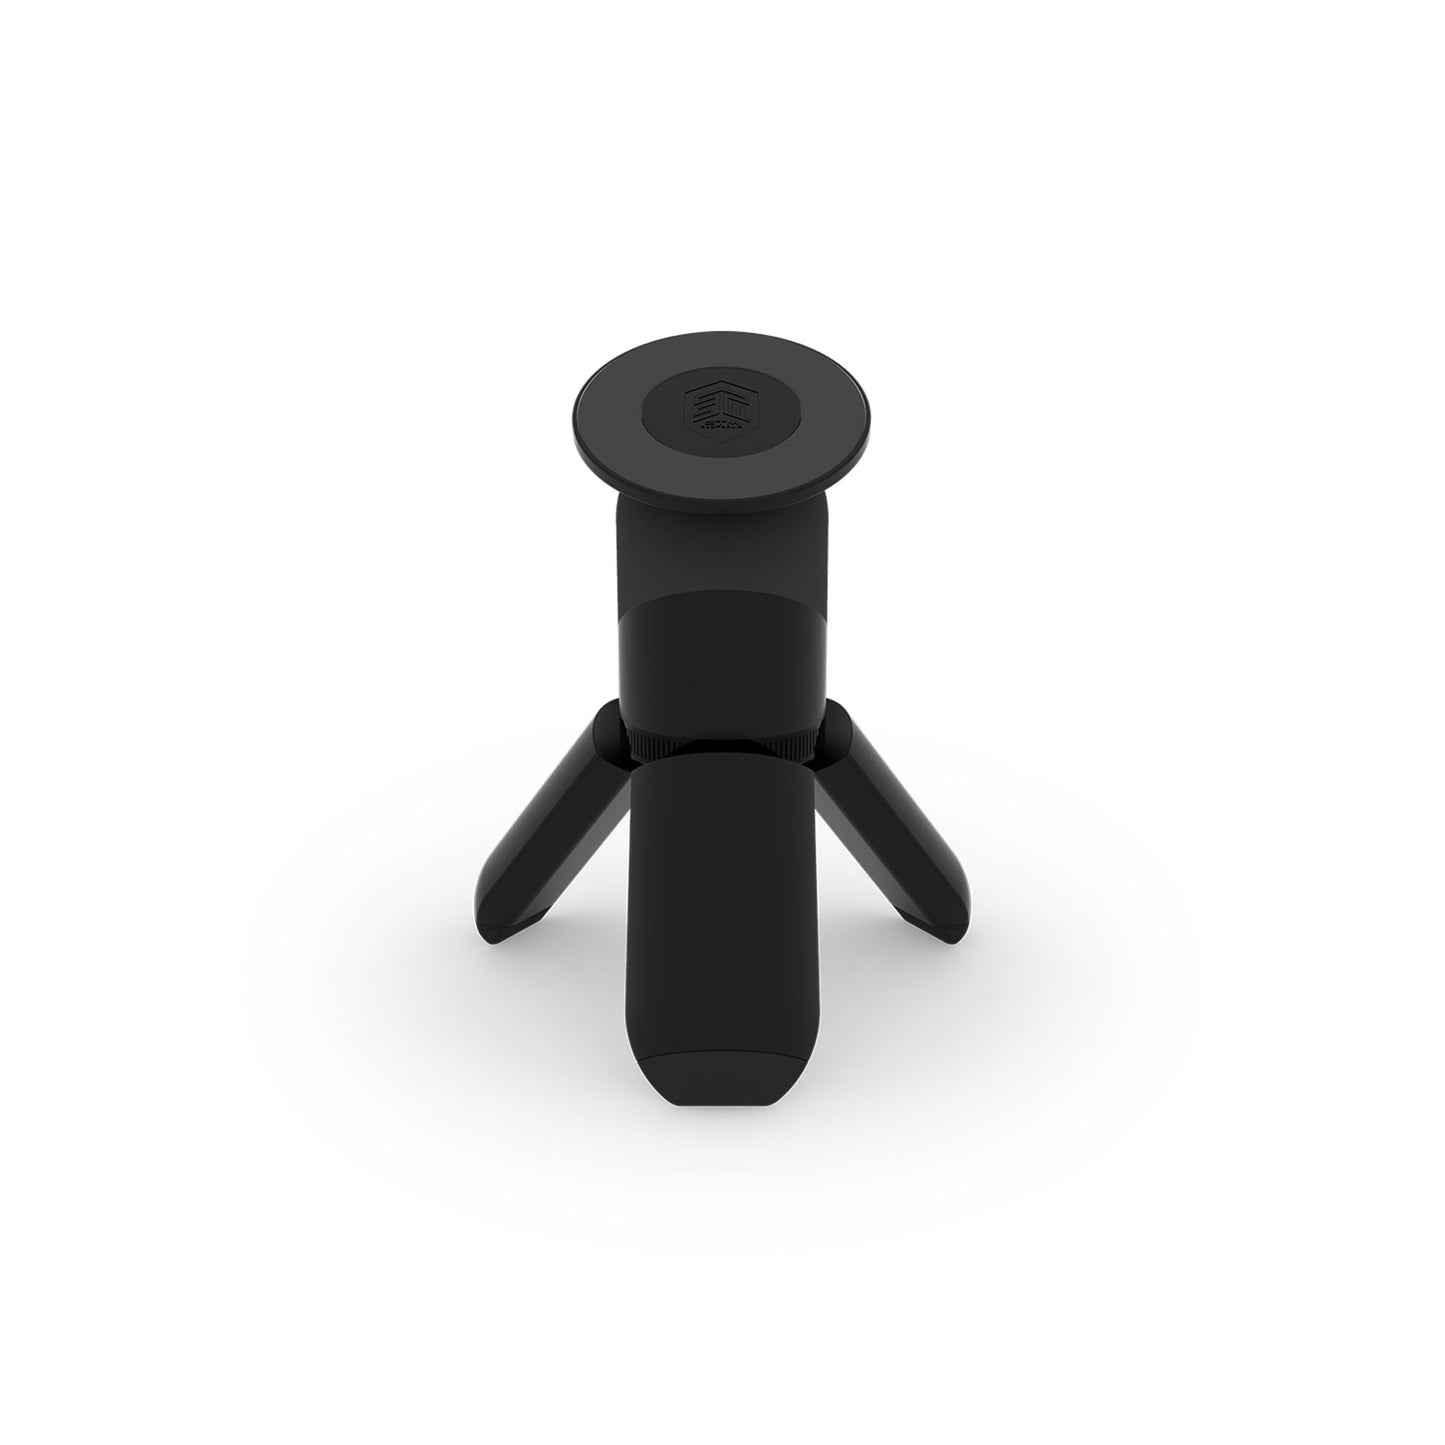 STM MagPod Tripod for iPhone with MagSafe Compability - Black (Barcode: 810046111246 )